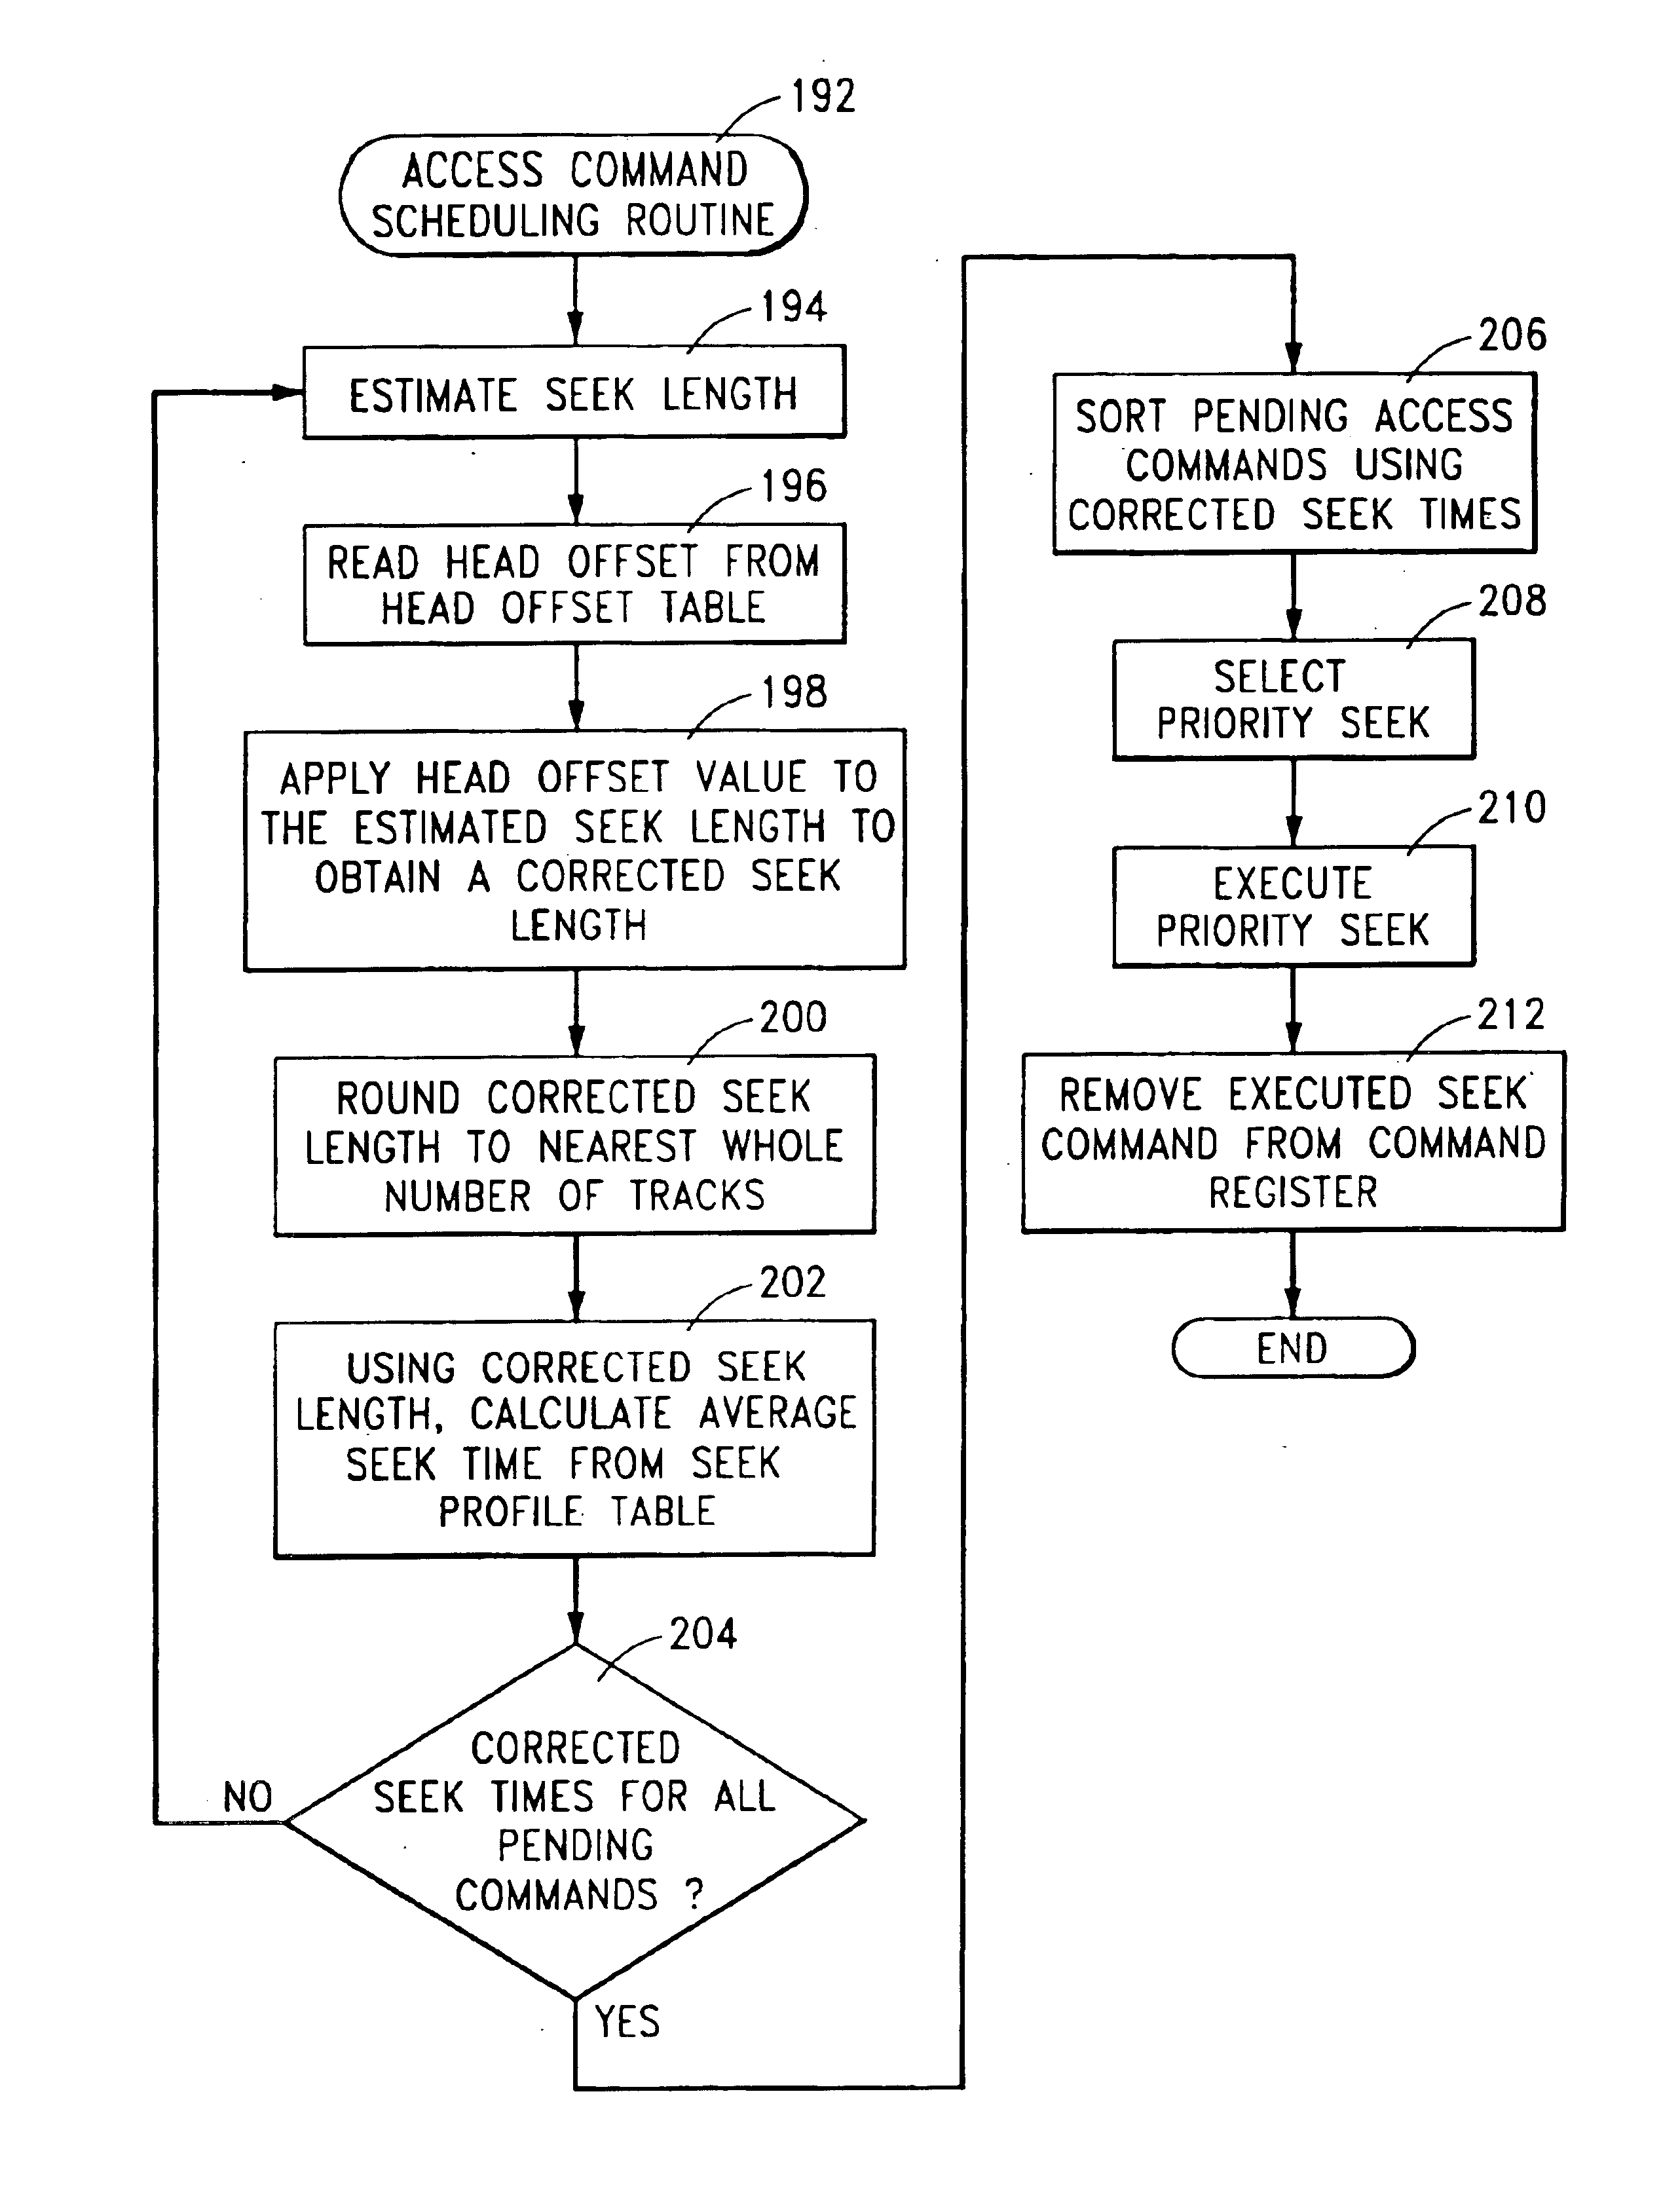 Performance in a data storage device using head-to-head offsets in access command scheduling